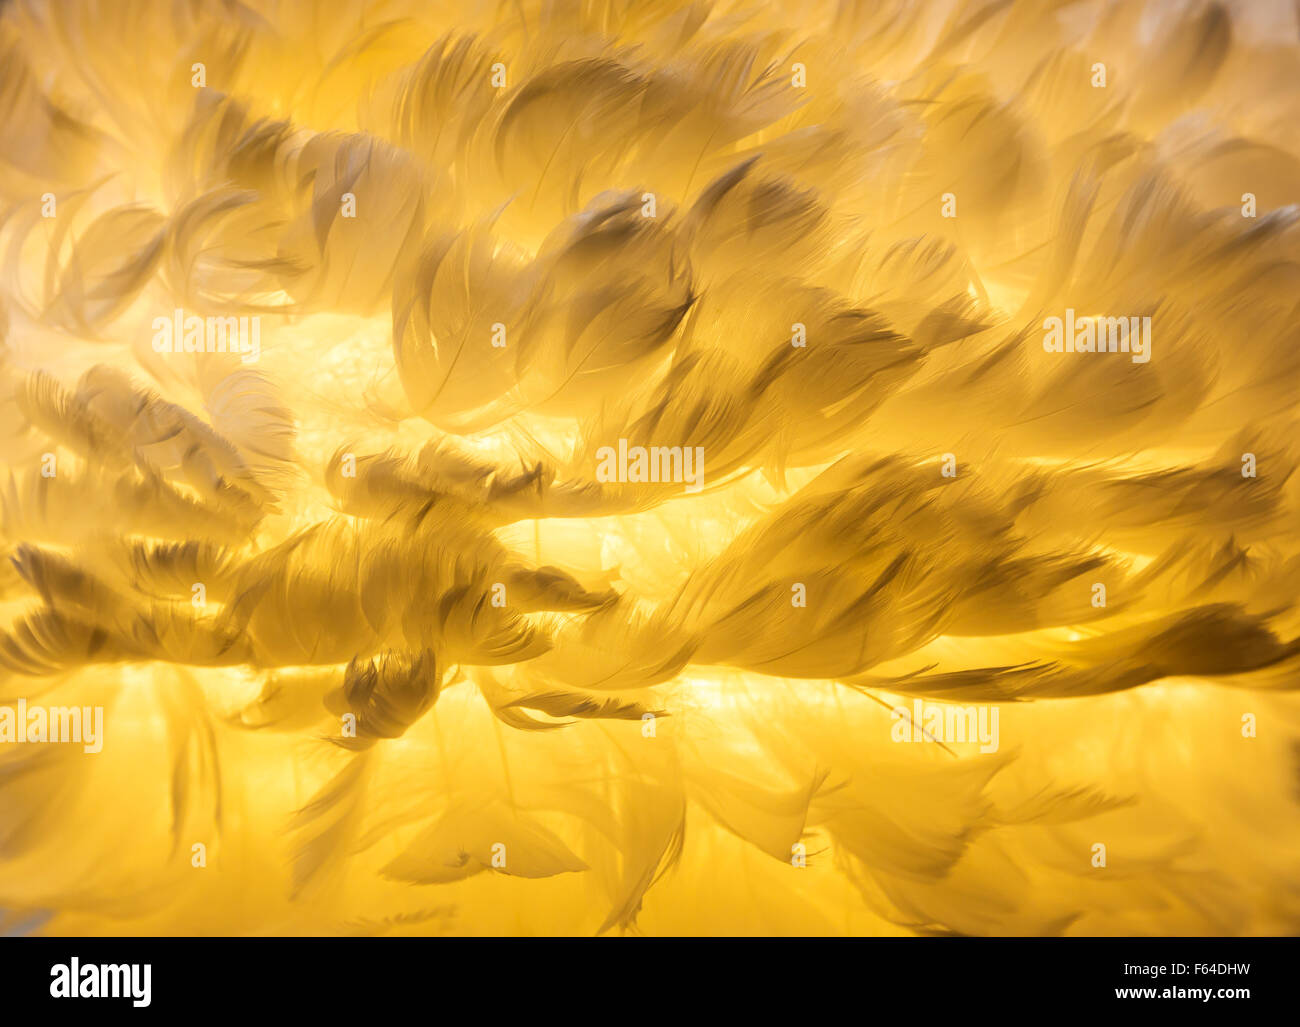 Closeup picture of yellow feathers Stock Photo